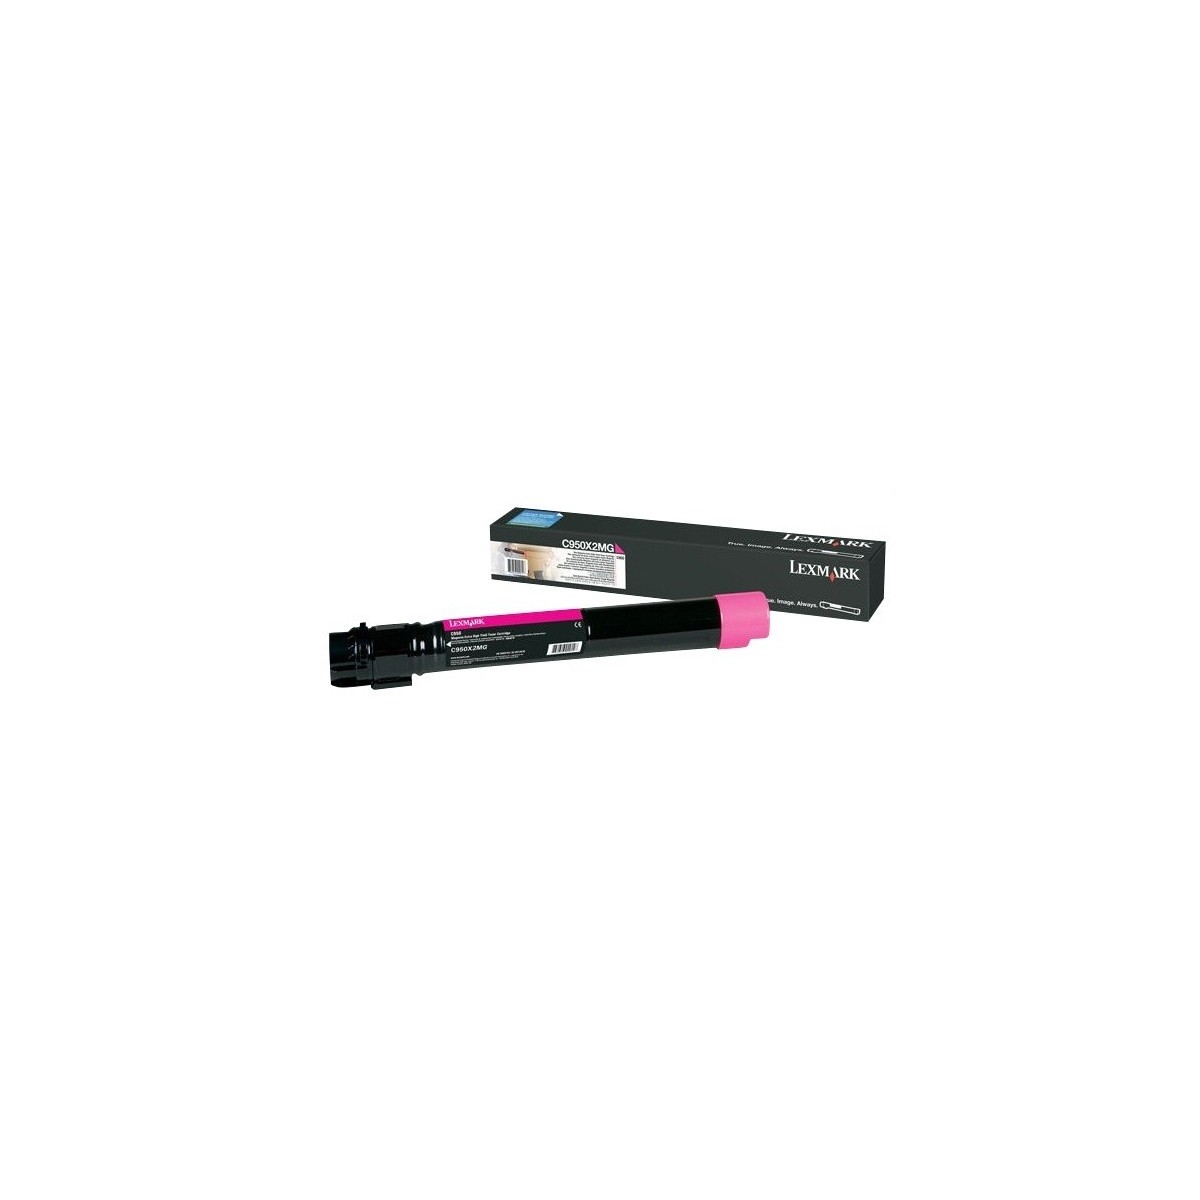 Lexmark C950X2MG - 24000 pages - Magenta - 1 pc(s)